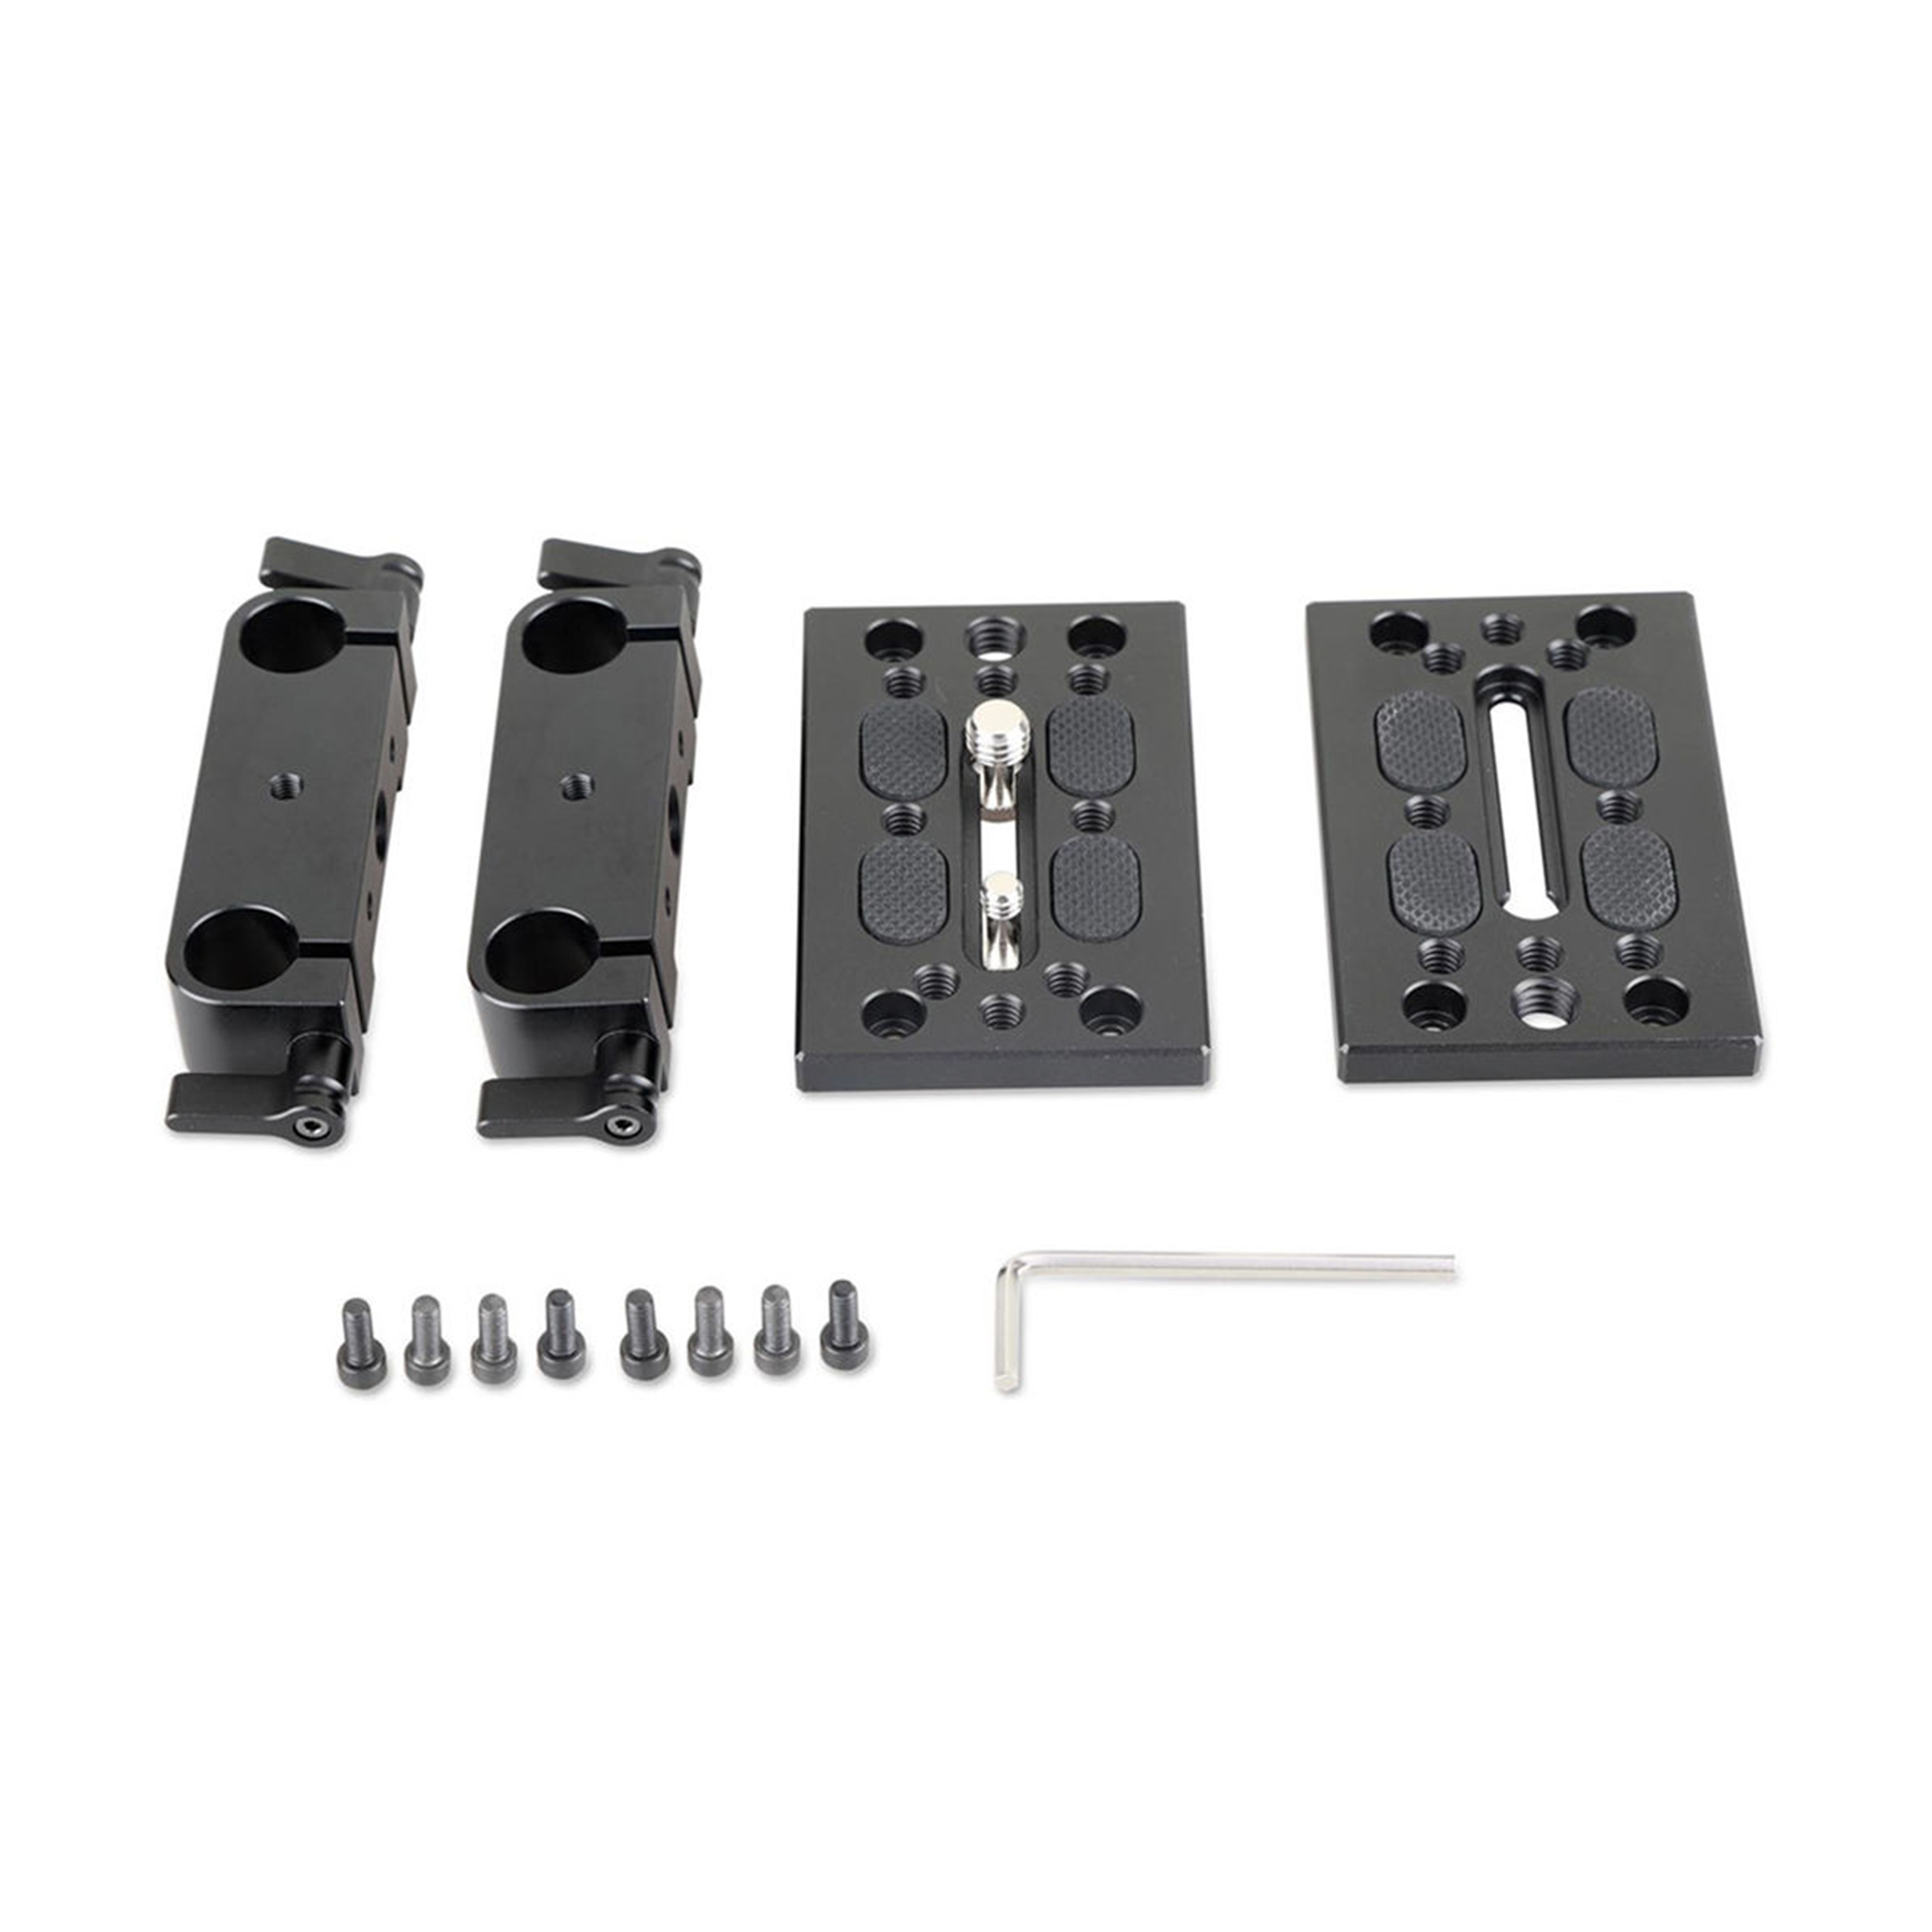 SmallRig Tripod Mounting Kit with 2 x Plates and 2 x 15mm Rod Clamps